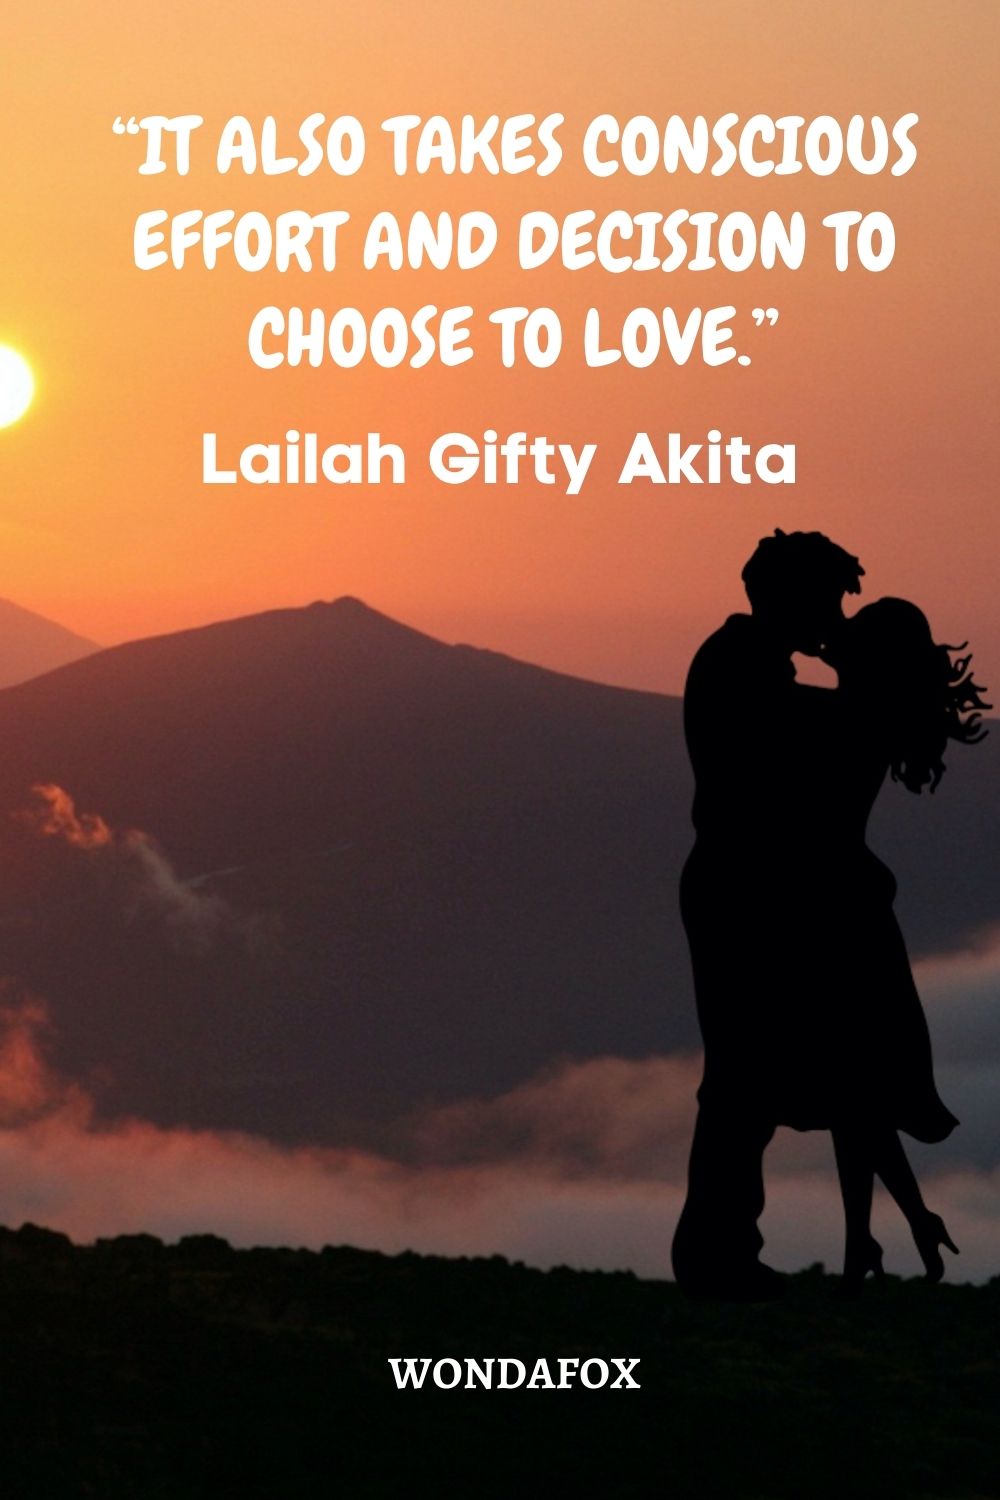 “It also takes conscious effort and decision to choose to love.”
Lailah Gifty Akita